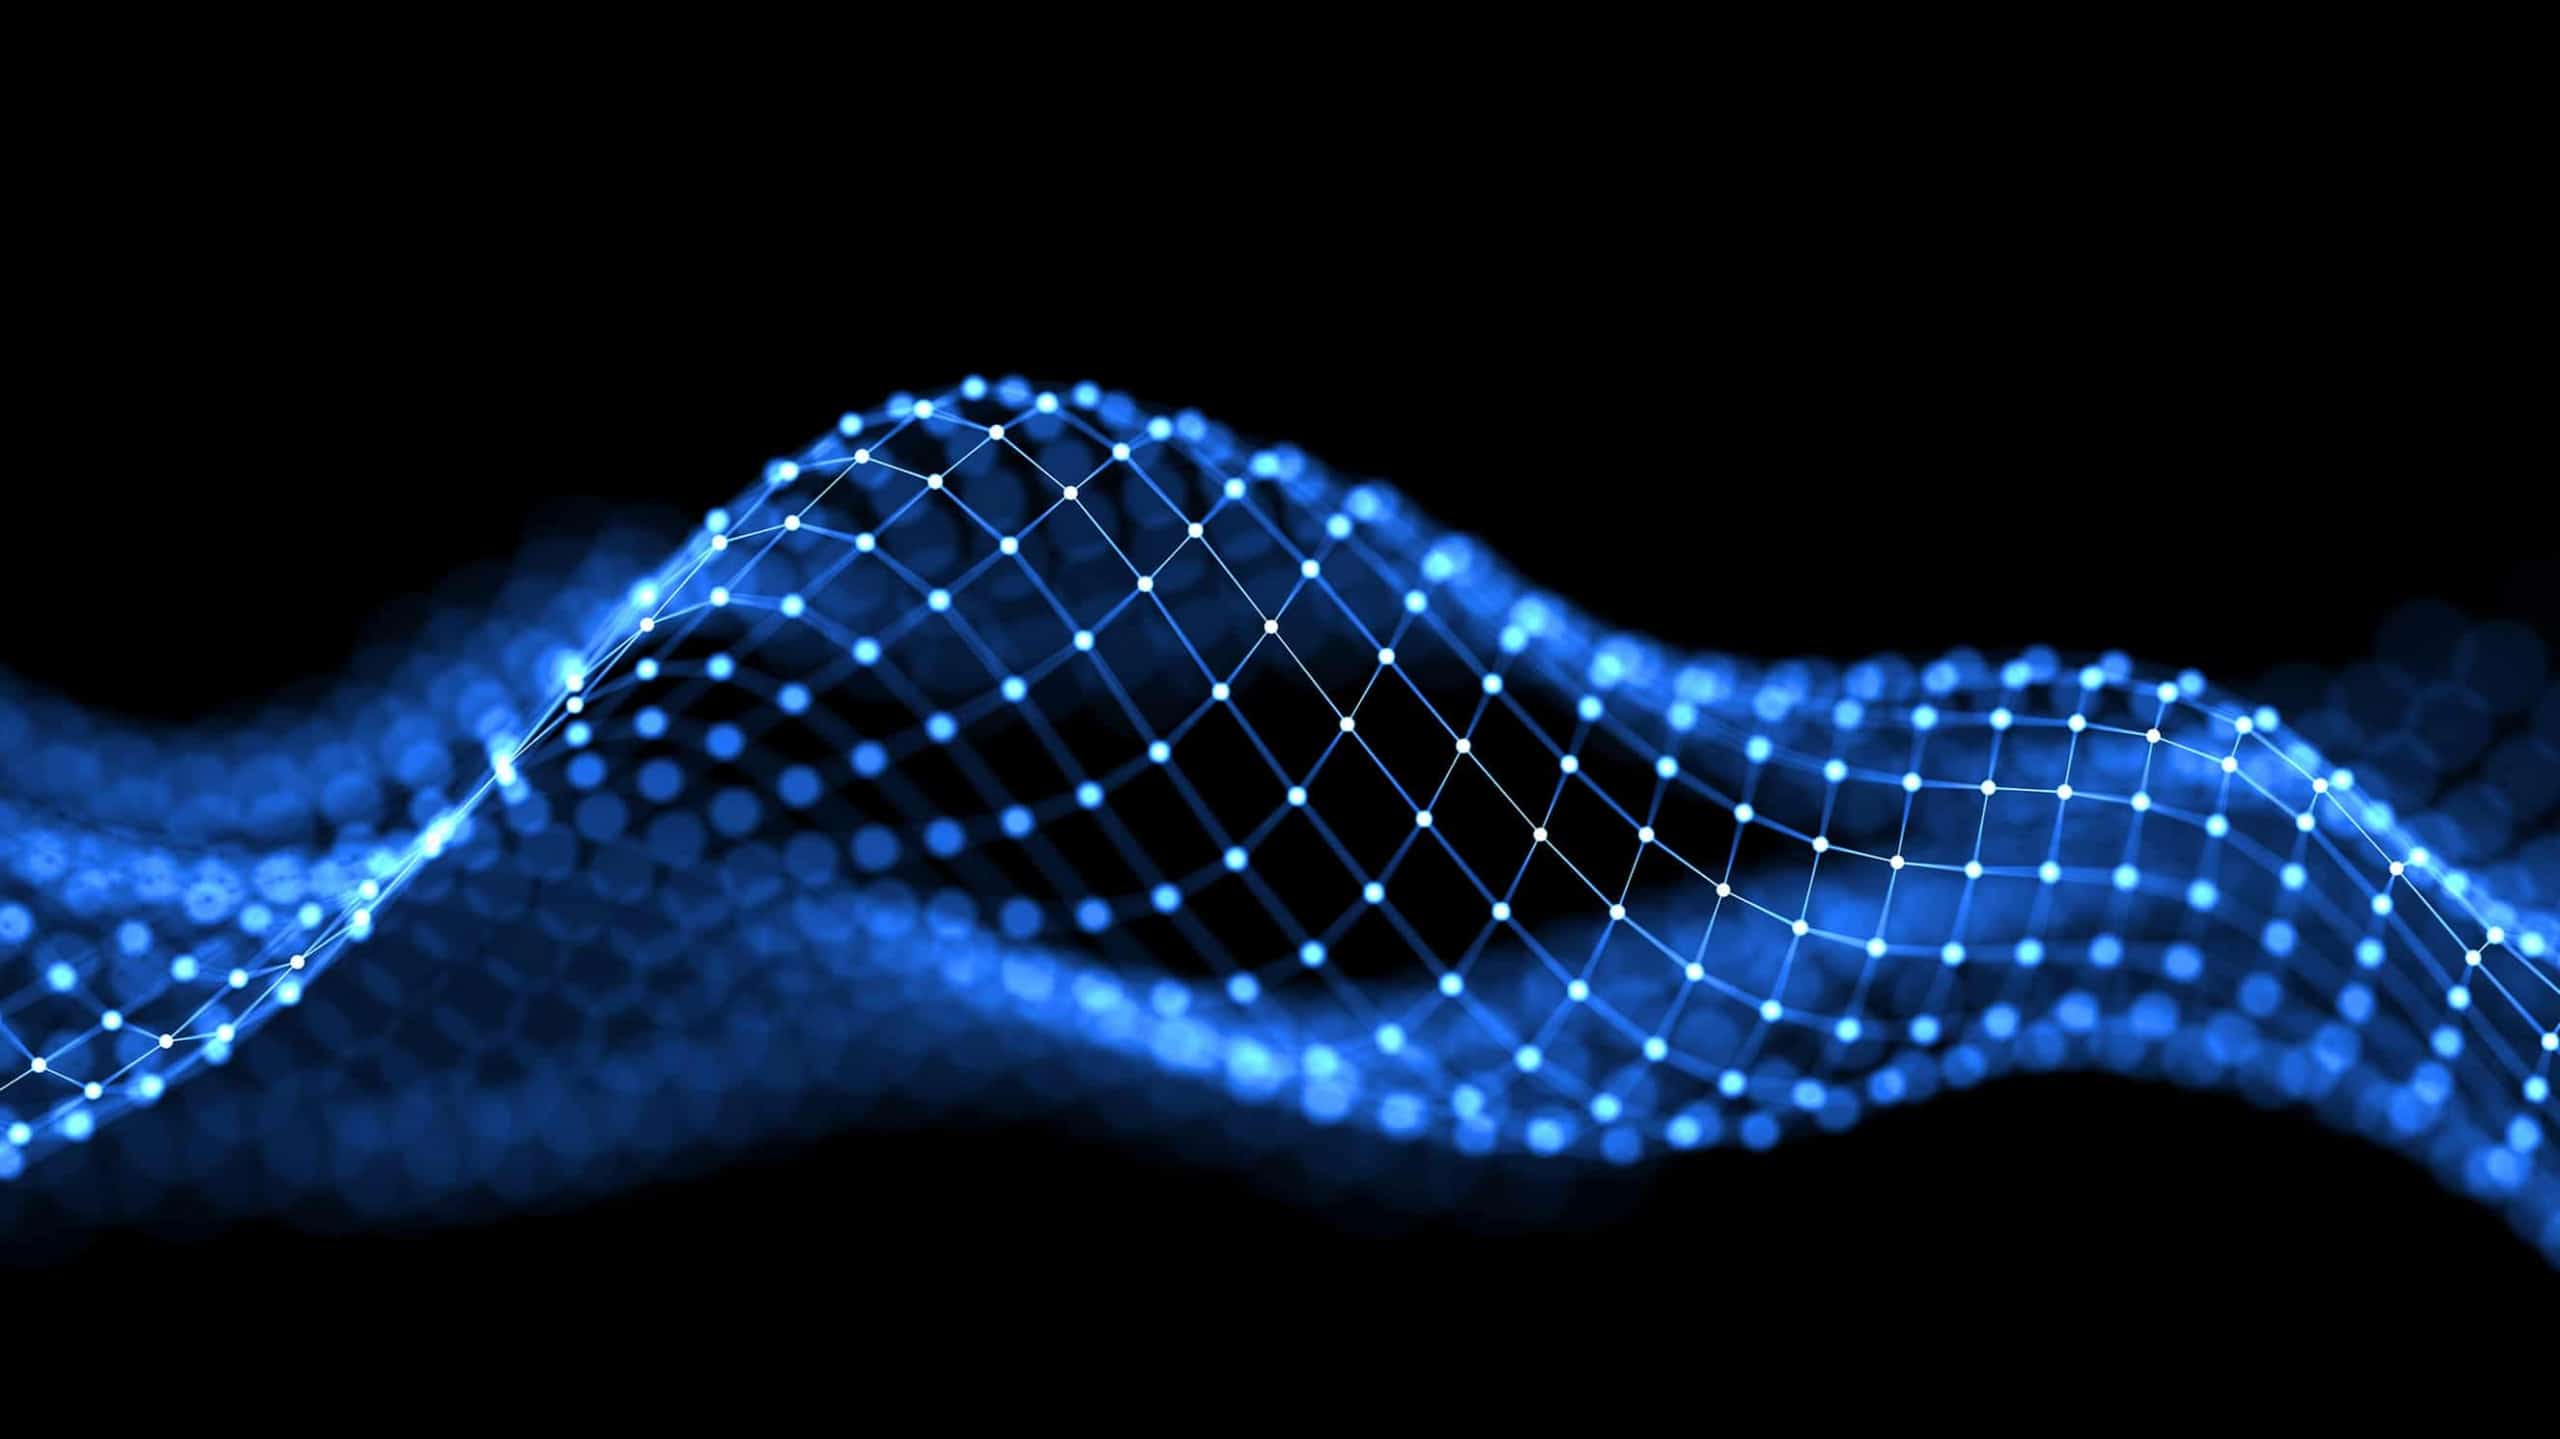 Abstract image of a glowing blue digital wave composed of interconnected dots and lines on a black background, symbolizing futuristic technology or data flow.